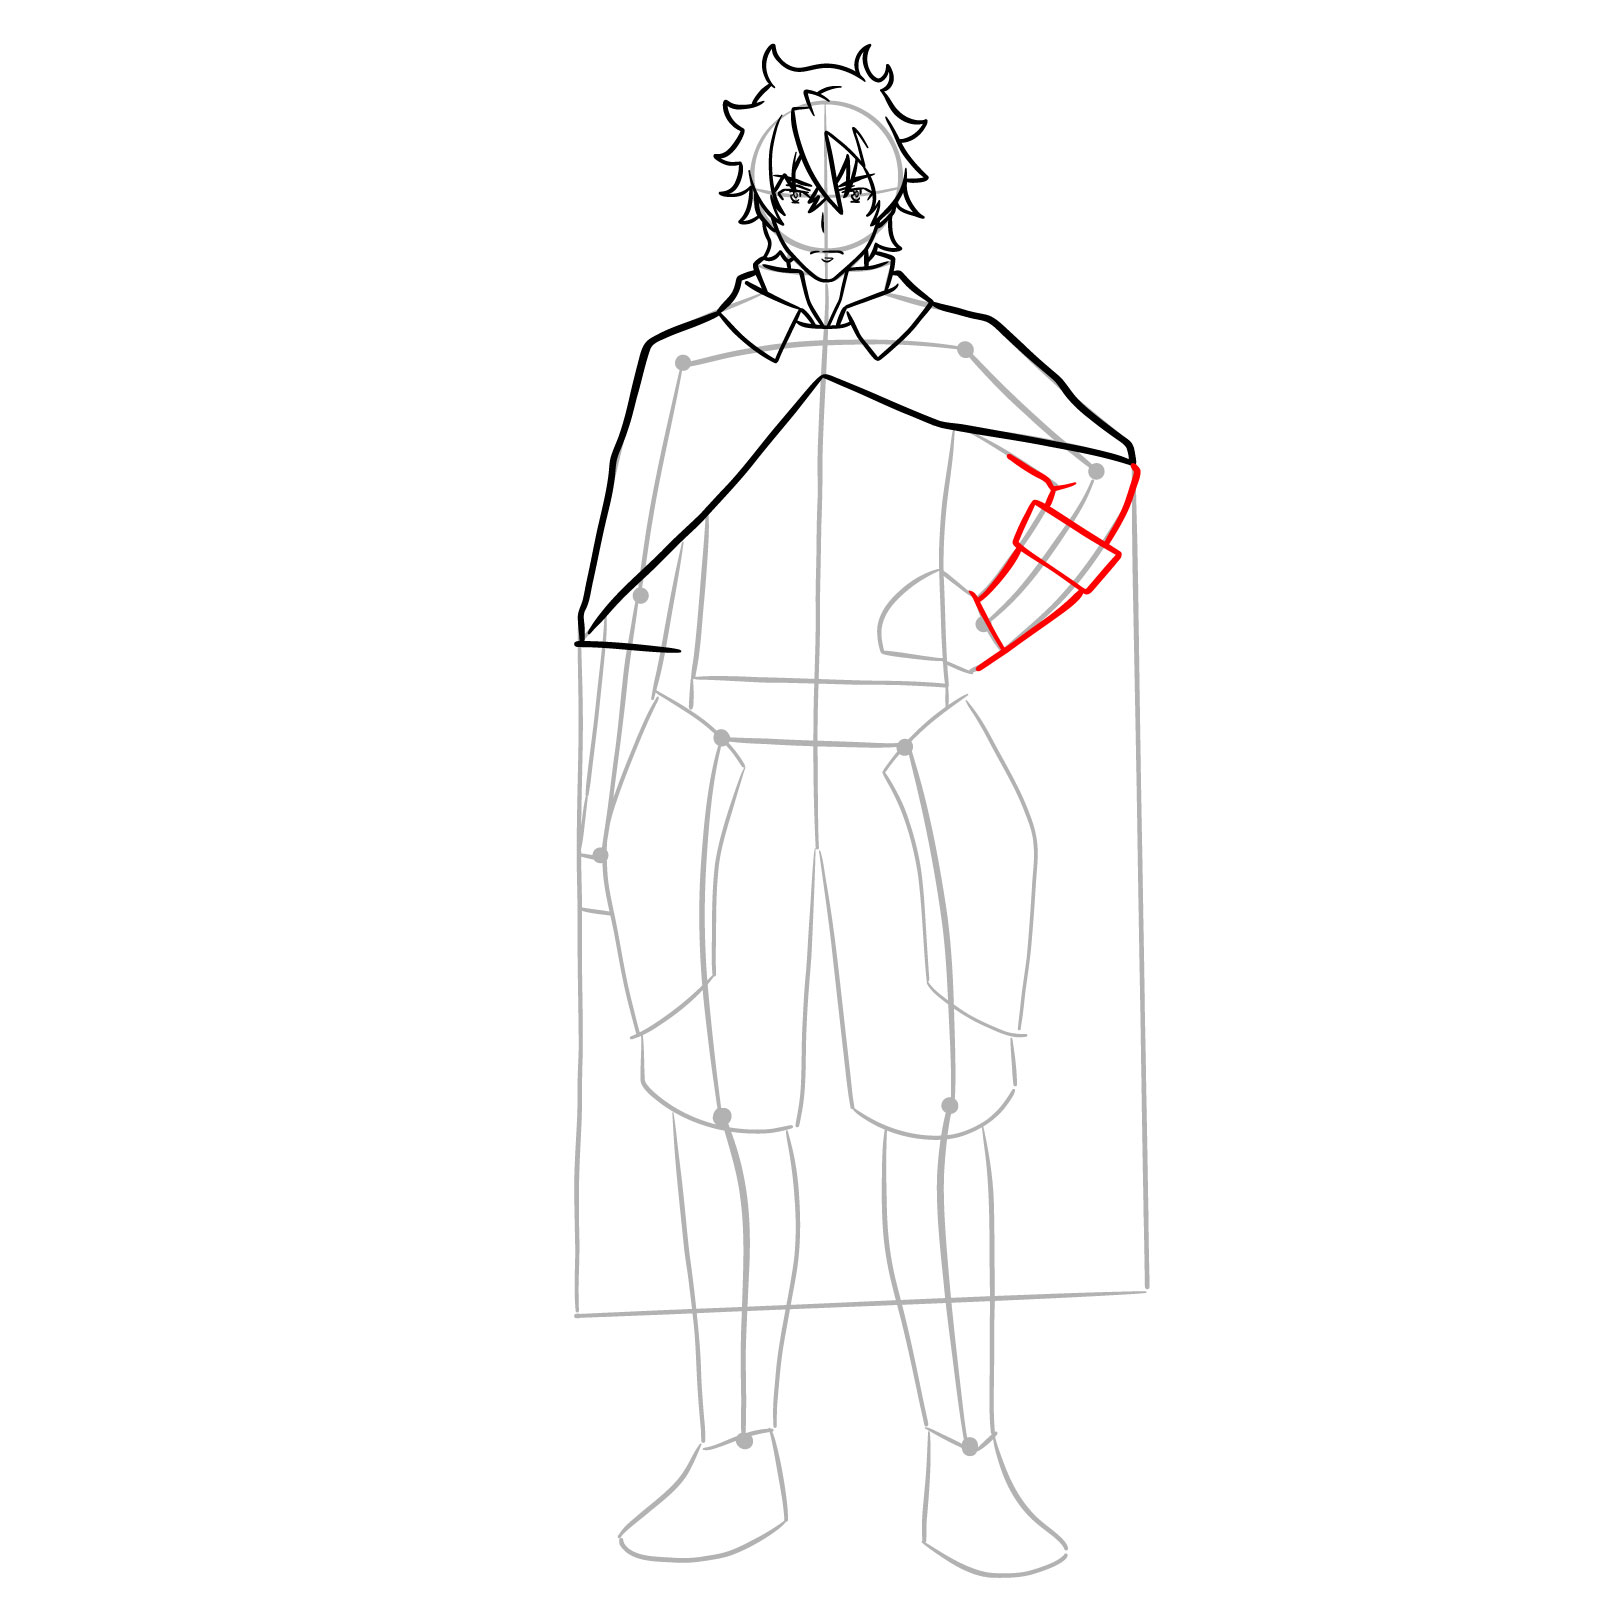 How to draw Naofumi Iwatani from The Rising of the Shield Hero - step 12